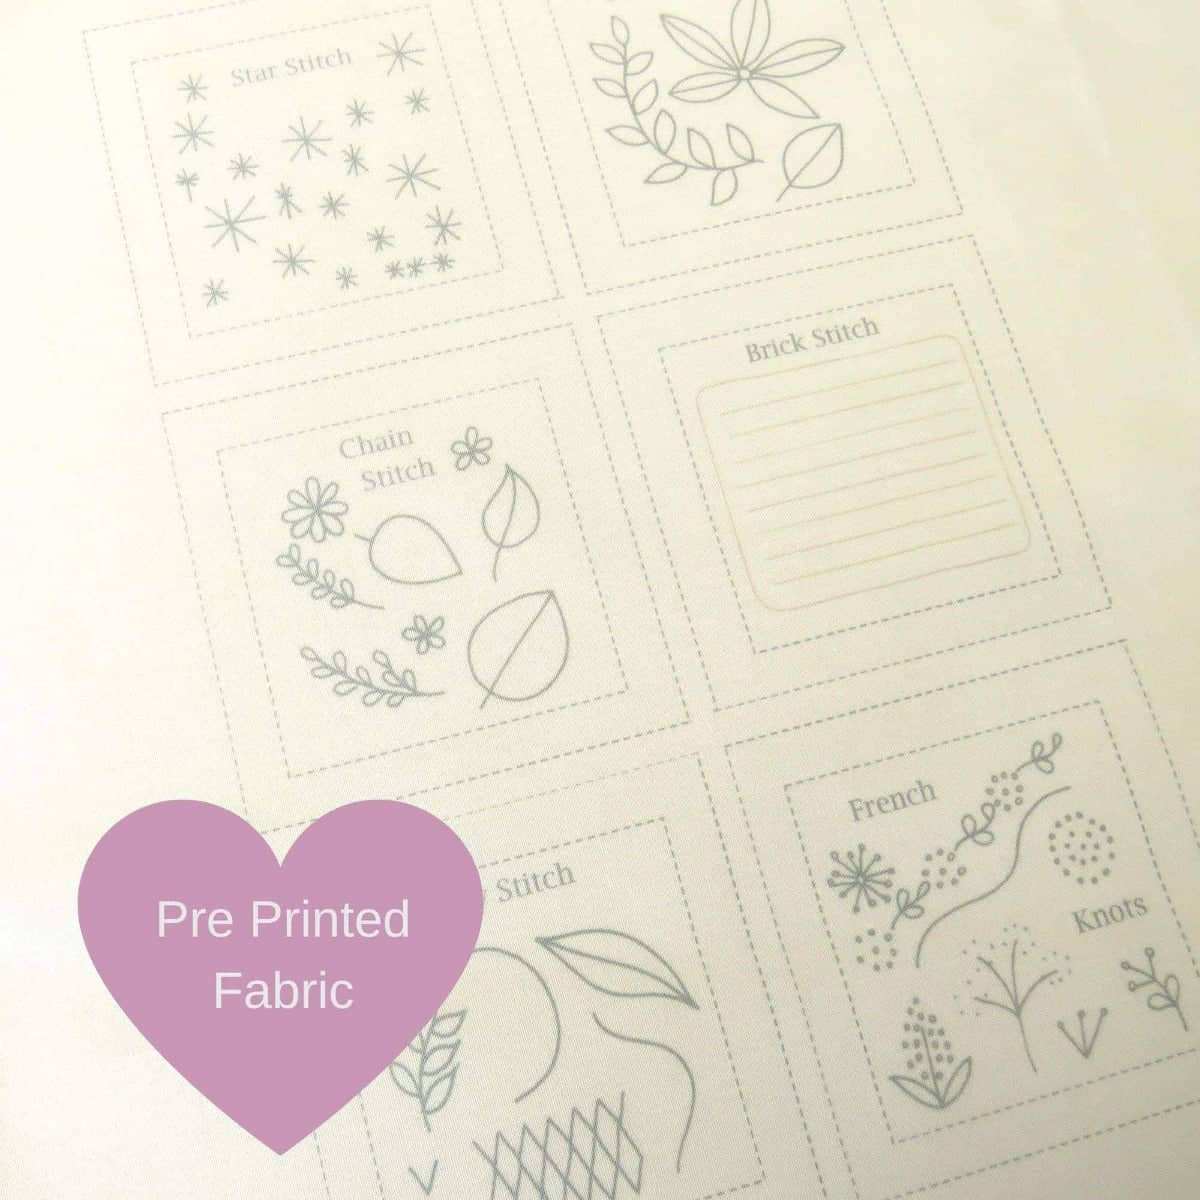 Embroidery Journal Pre Printed Embroidery Fabric – StitchDoodles